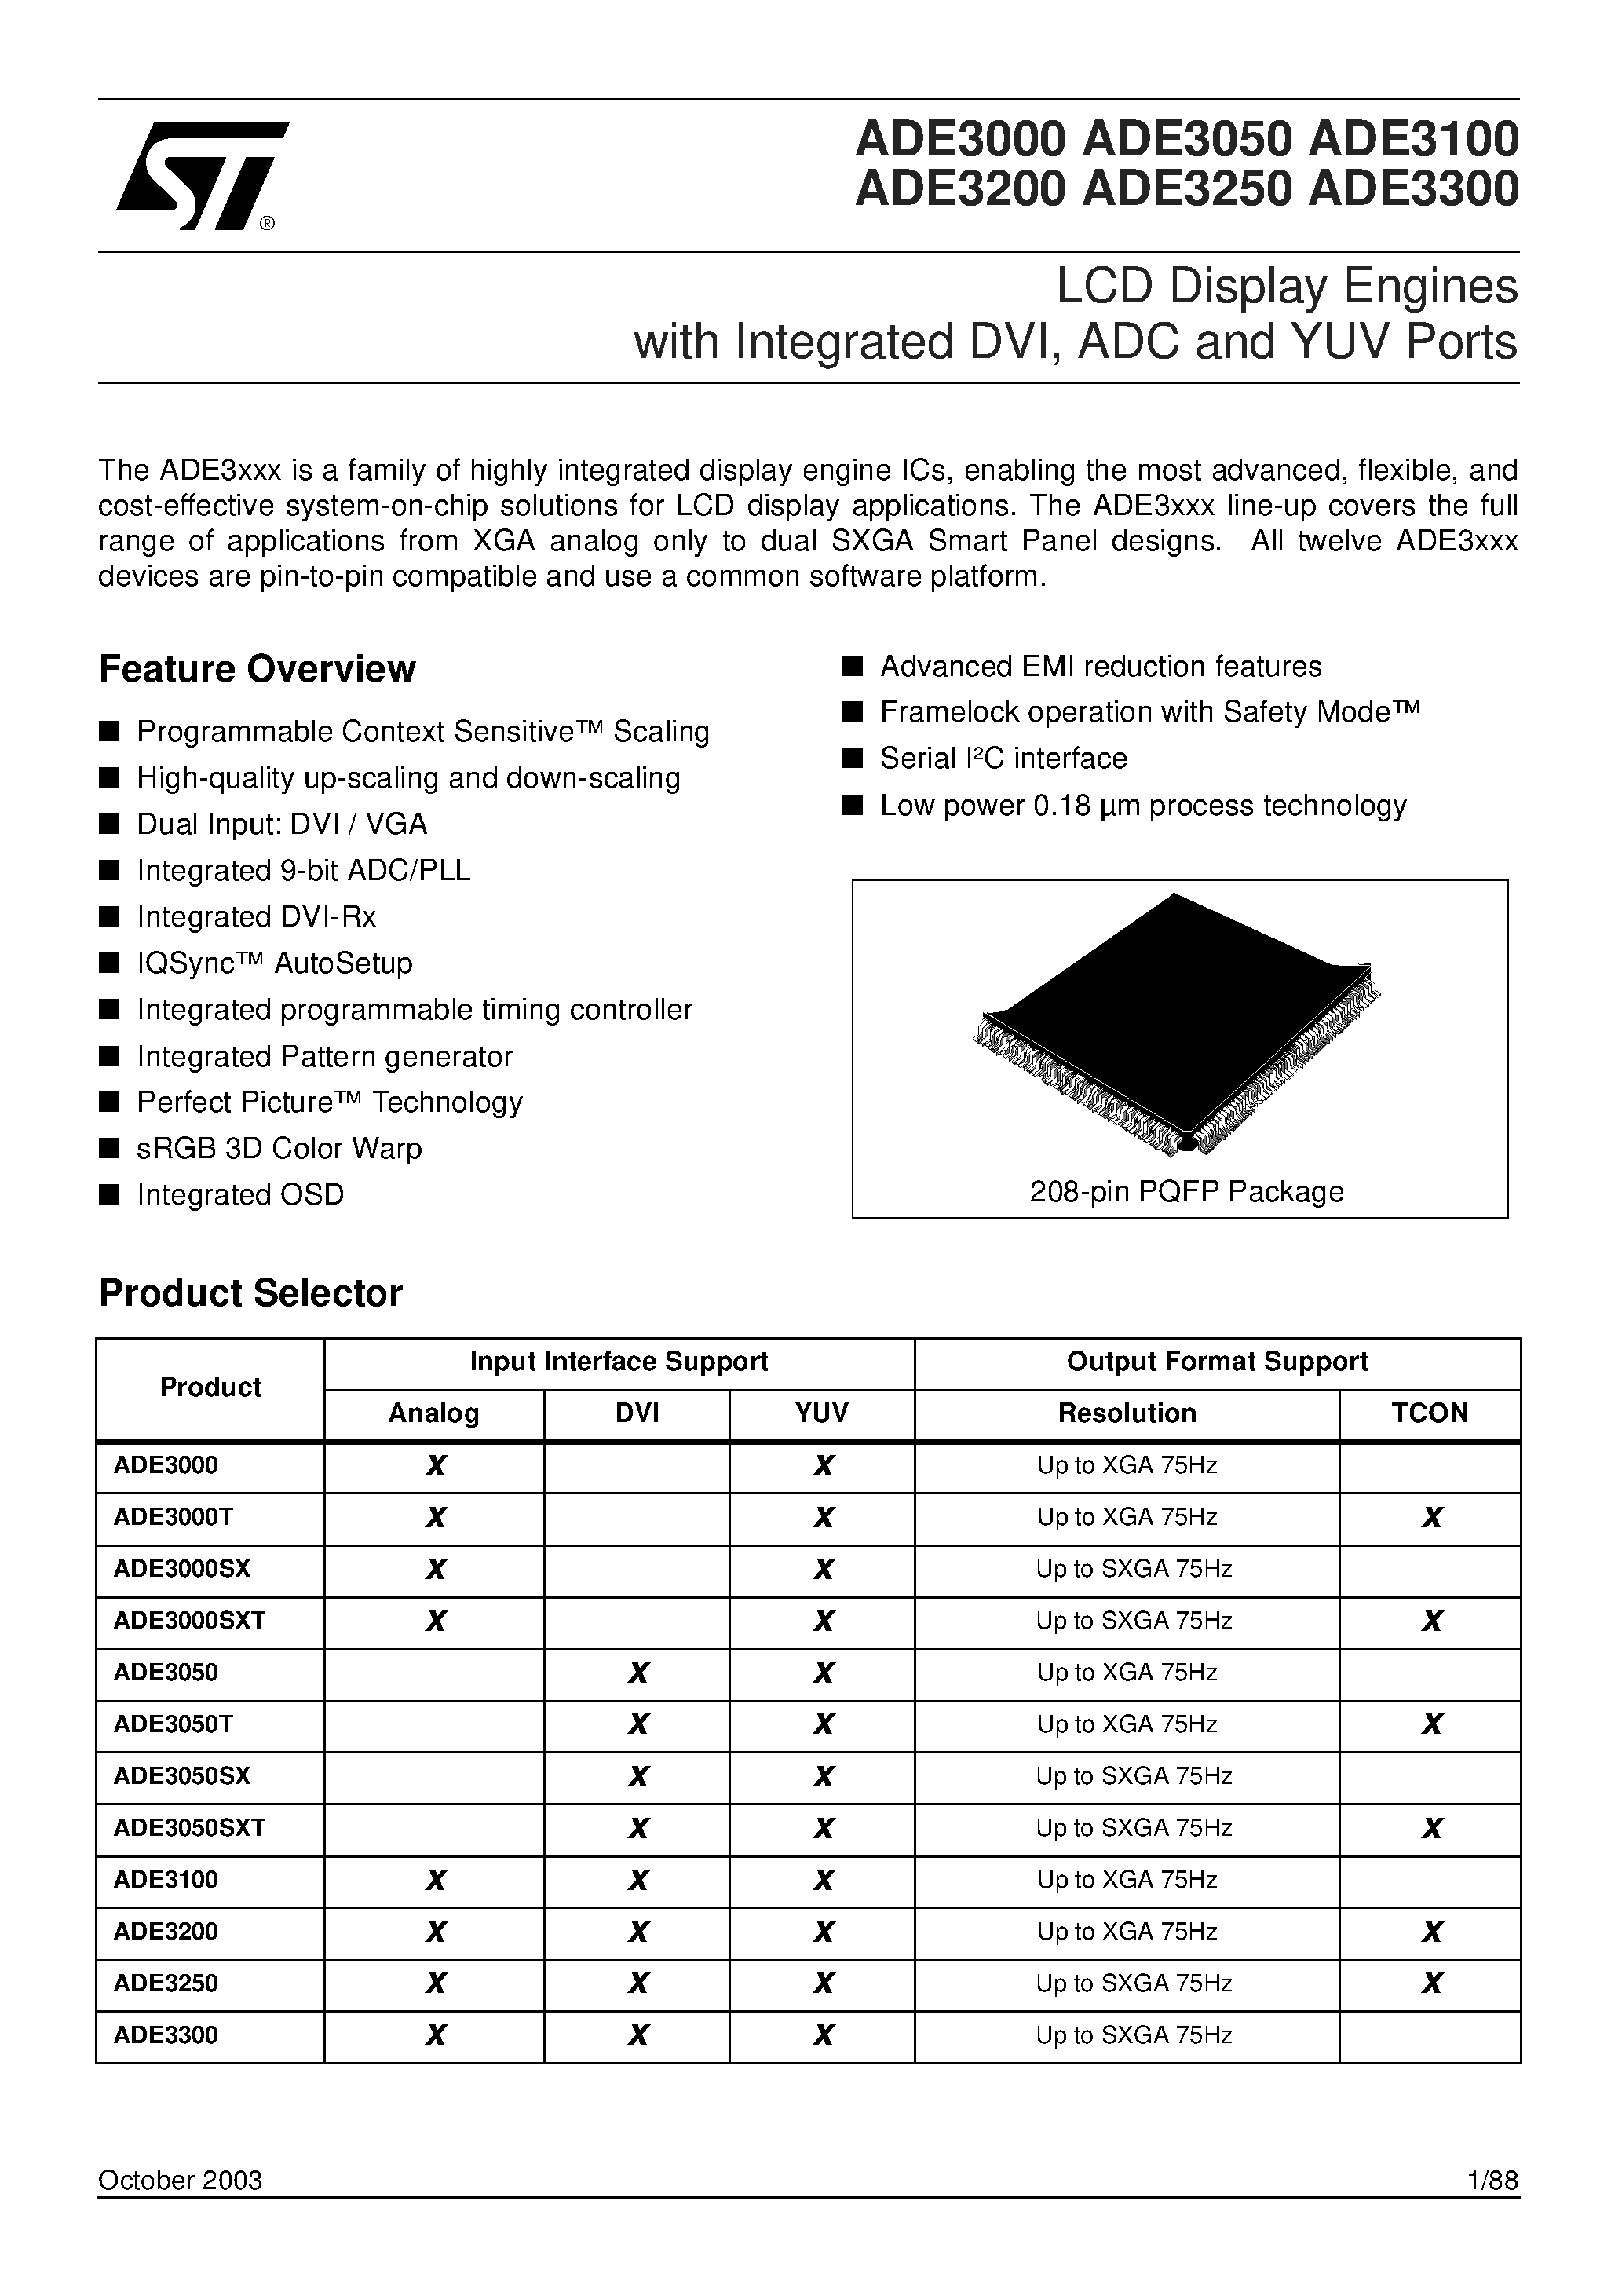 Datasheet ADE3050 - LCD Display Engines with Integrated DVI/ ADC and YUV Ports page 1